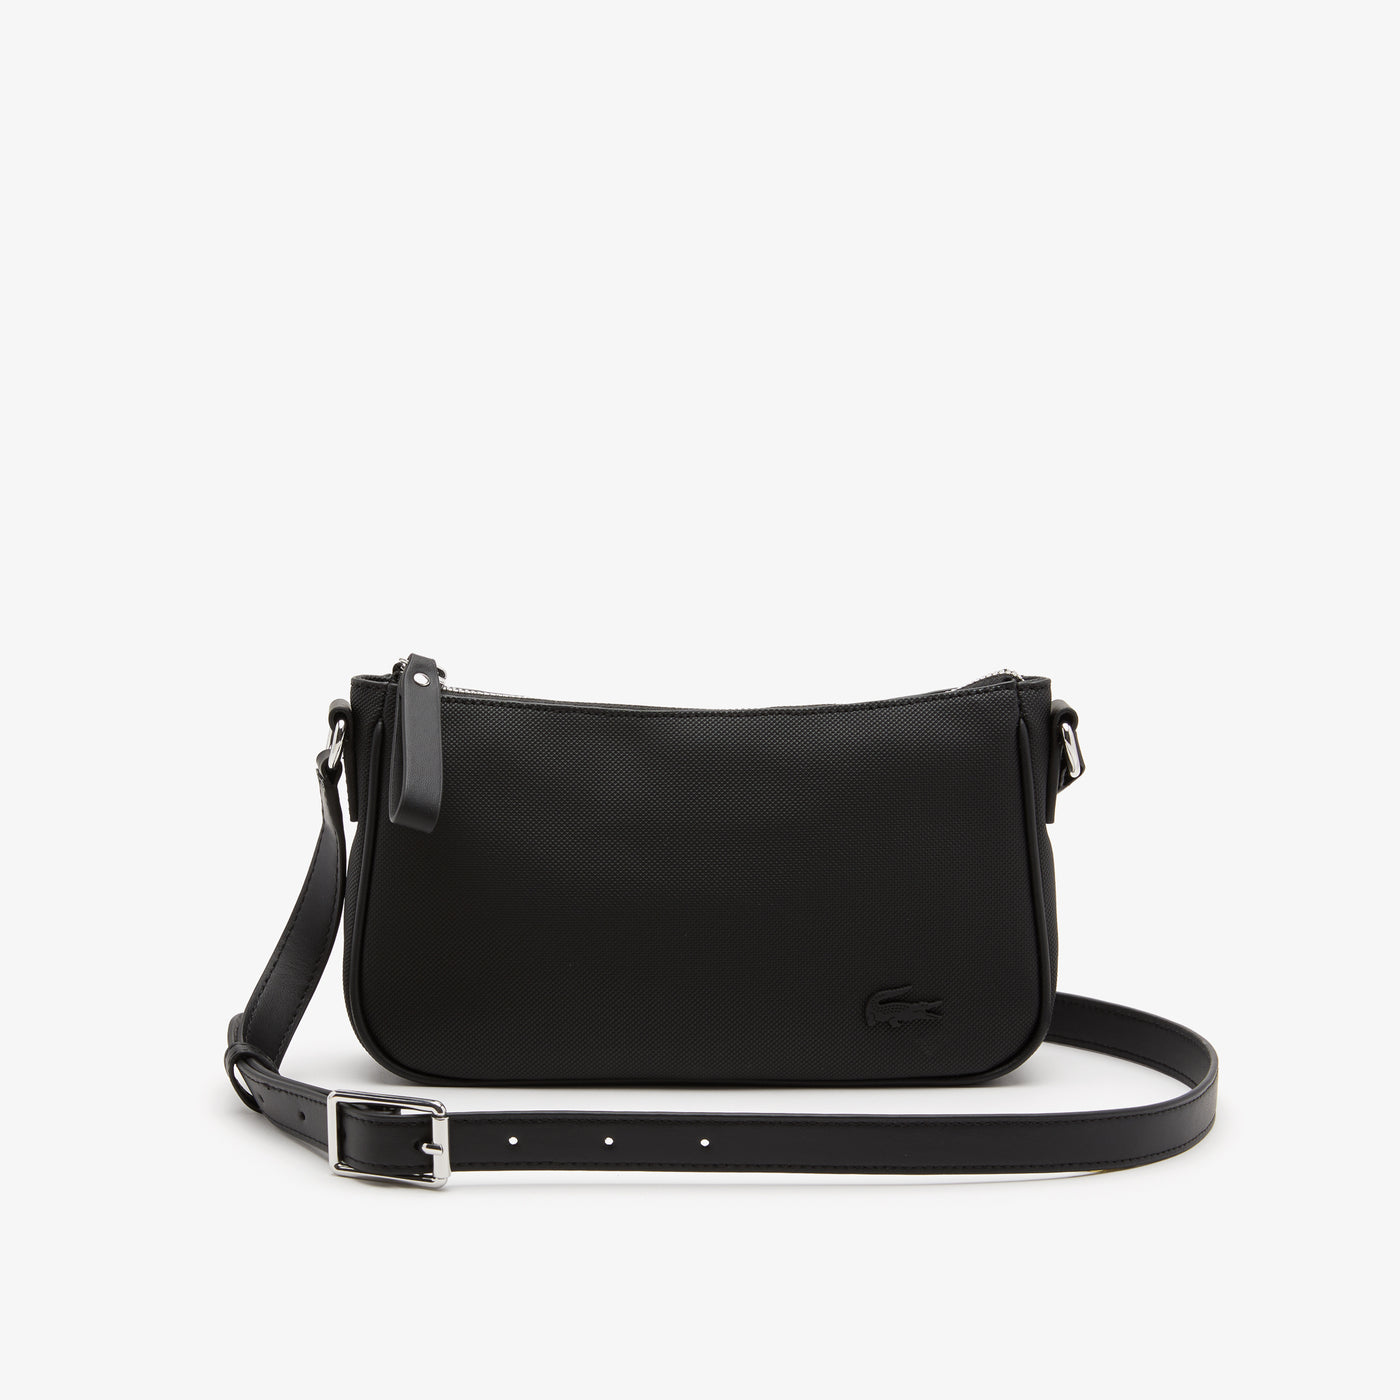 Shop The Latest Collection Of Lacoste Women'S Lacoste Adjustable Strap Crossover Bag - Nf4079Db In Lebanon